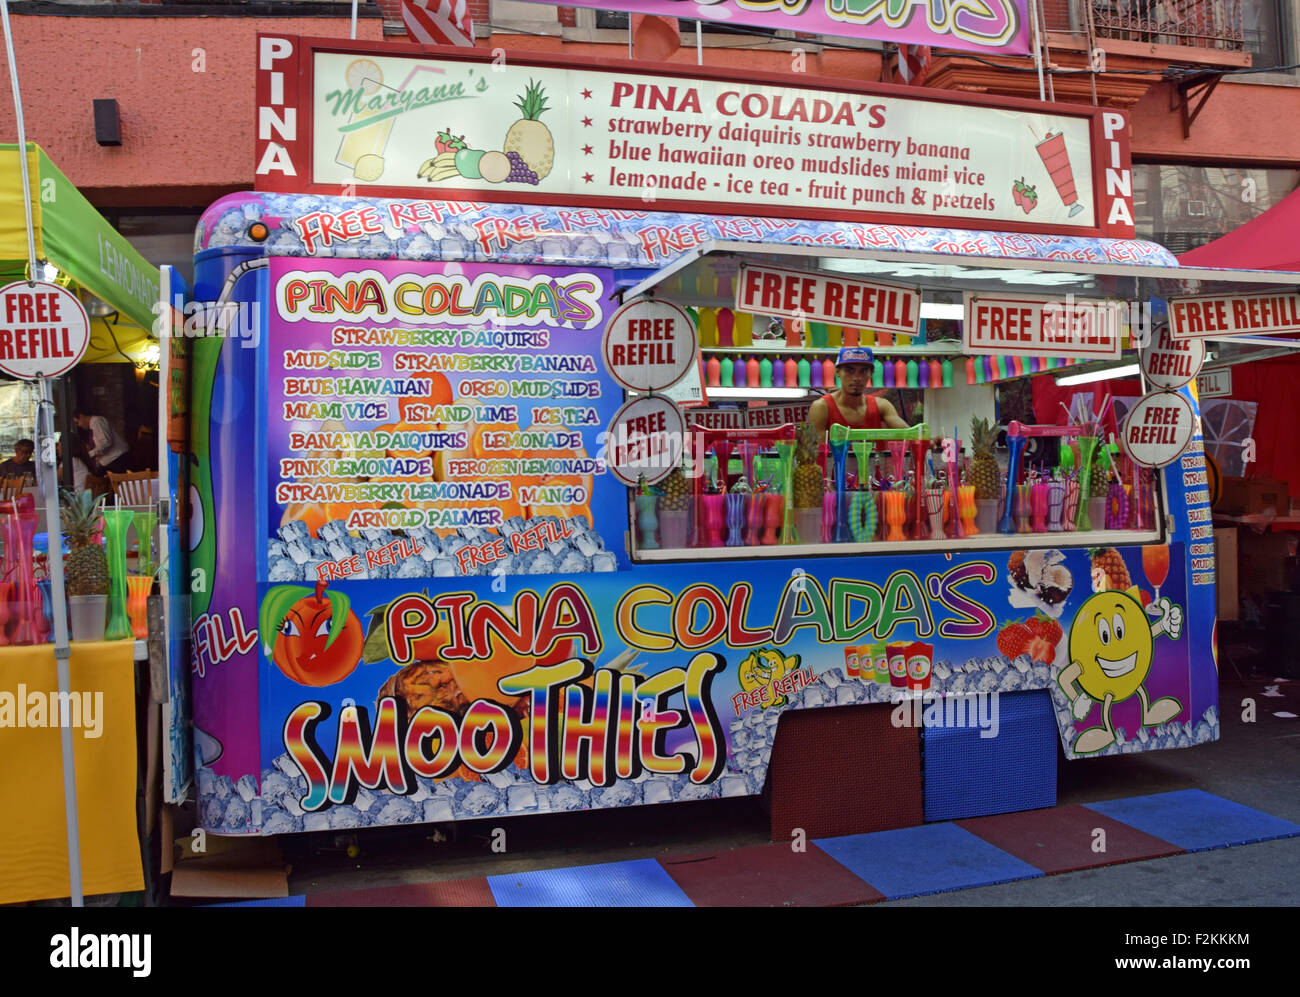 A truck at the San Gennaro Festival in New York selling beverages including Pina Coladas with free refills Stock Photo